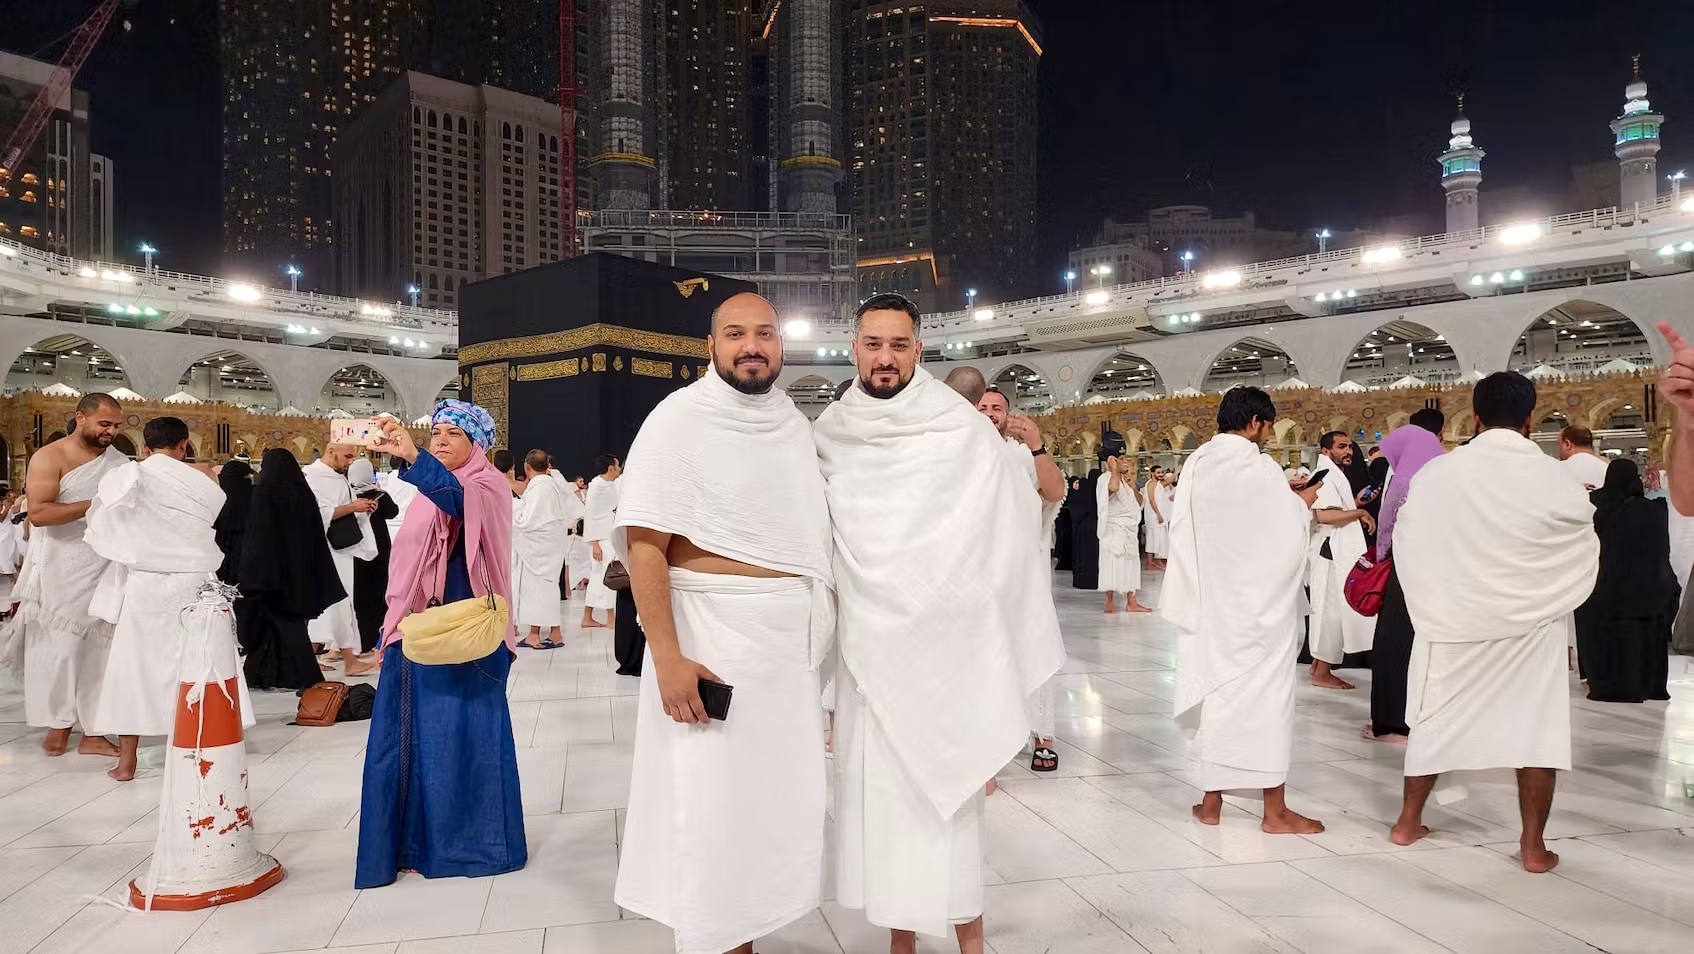 While on a pilgrimage in Saudi Arabia, Muhammad Ali Raza (left) experienced one of the happiest days of his life, getting an opportunity to return to Canada. (Contributed photo)